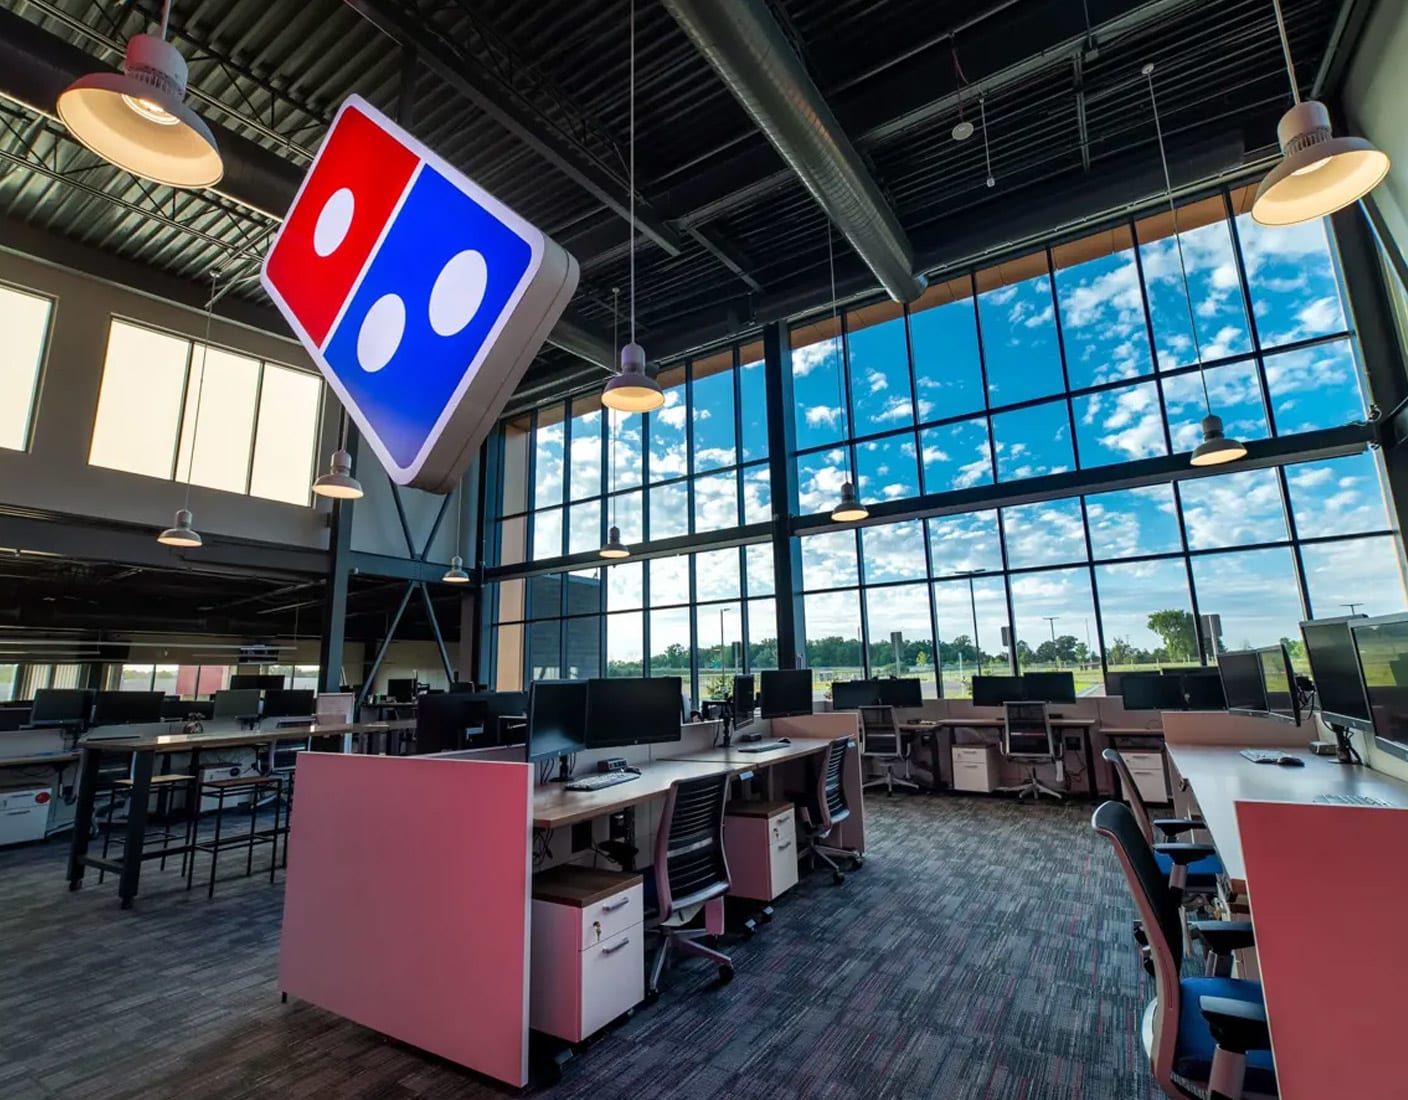 Photo of the inside of a large Domino's Pizza restaurant.